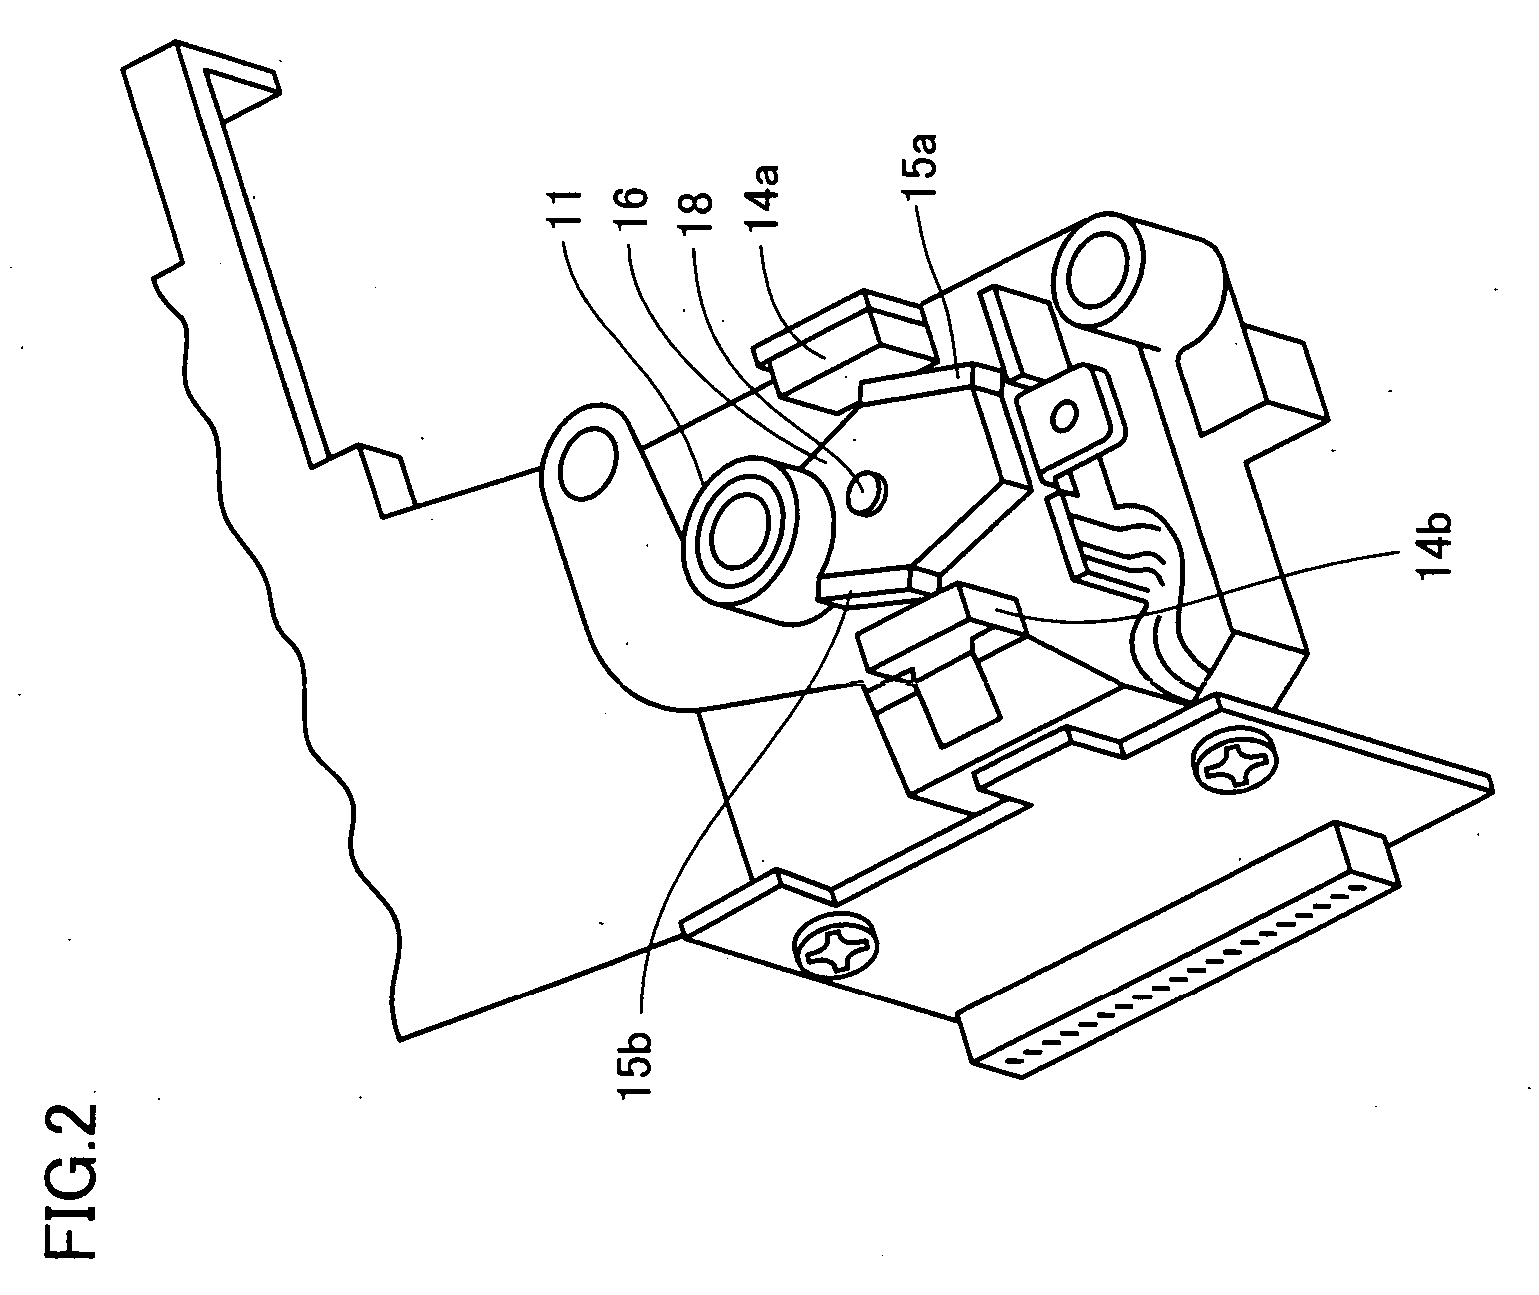 Optical pickup device employing magnet and tracking coil to drive objective lens in tracking direction